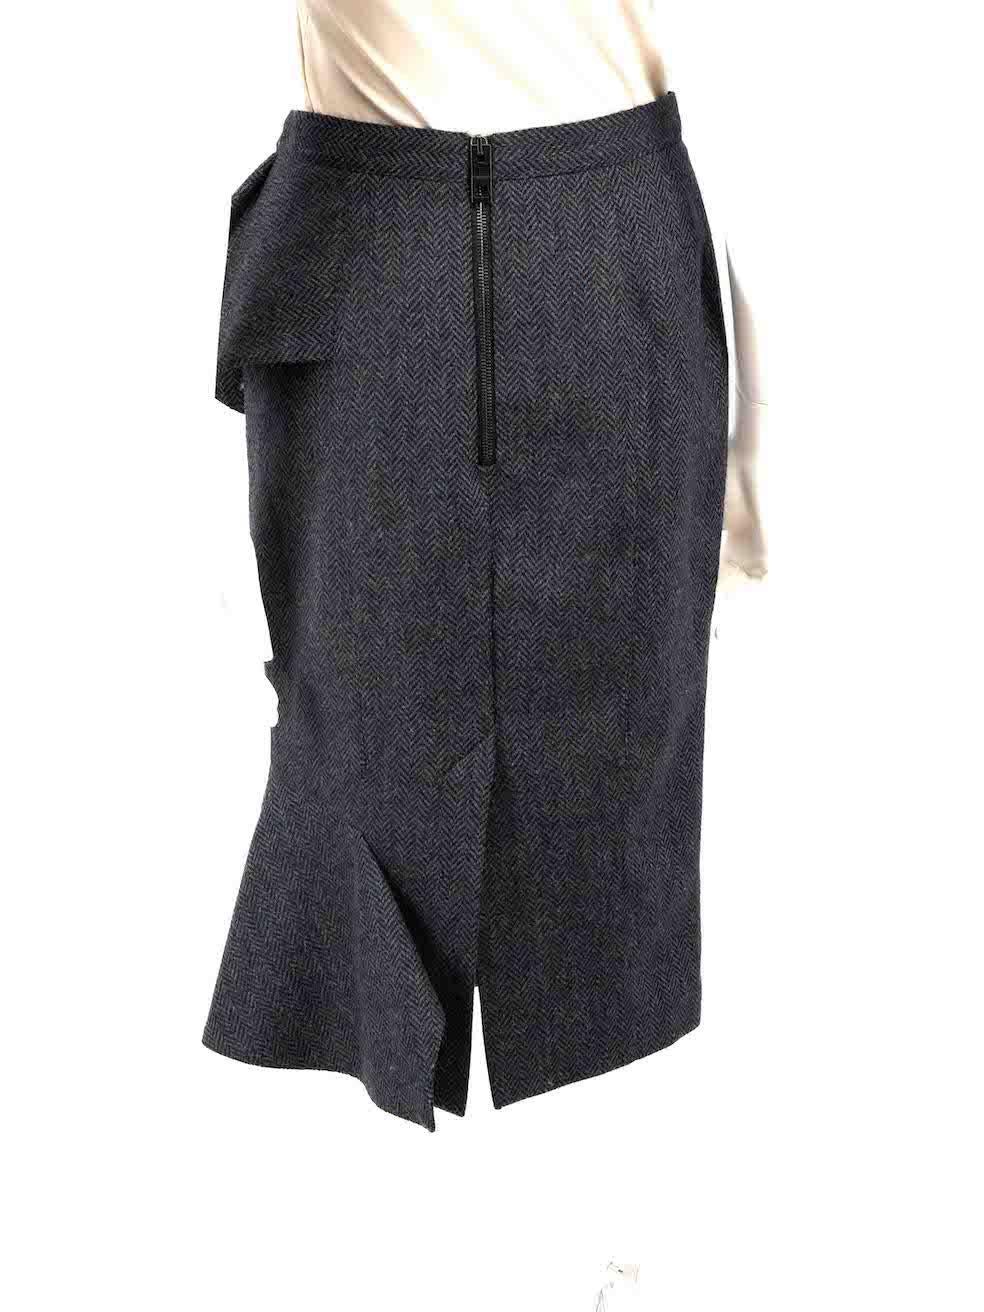 Burberry Burberry Prorsum Navy Wool Herringbone Ruffle Skirt Size M In Good Condition For Sale In London, GB